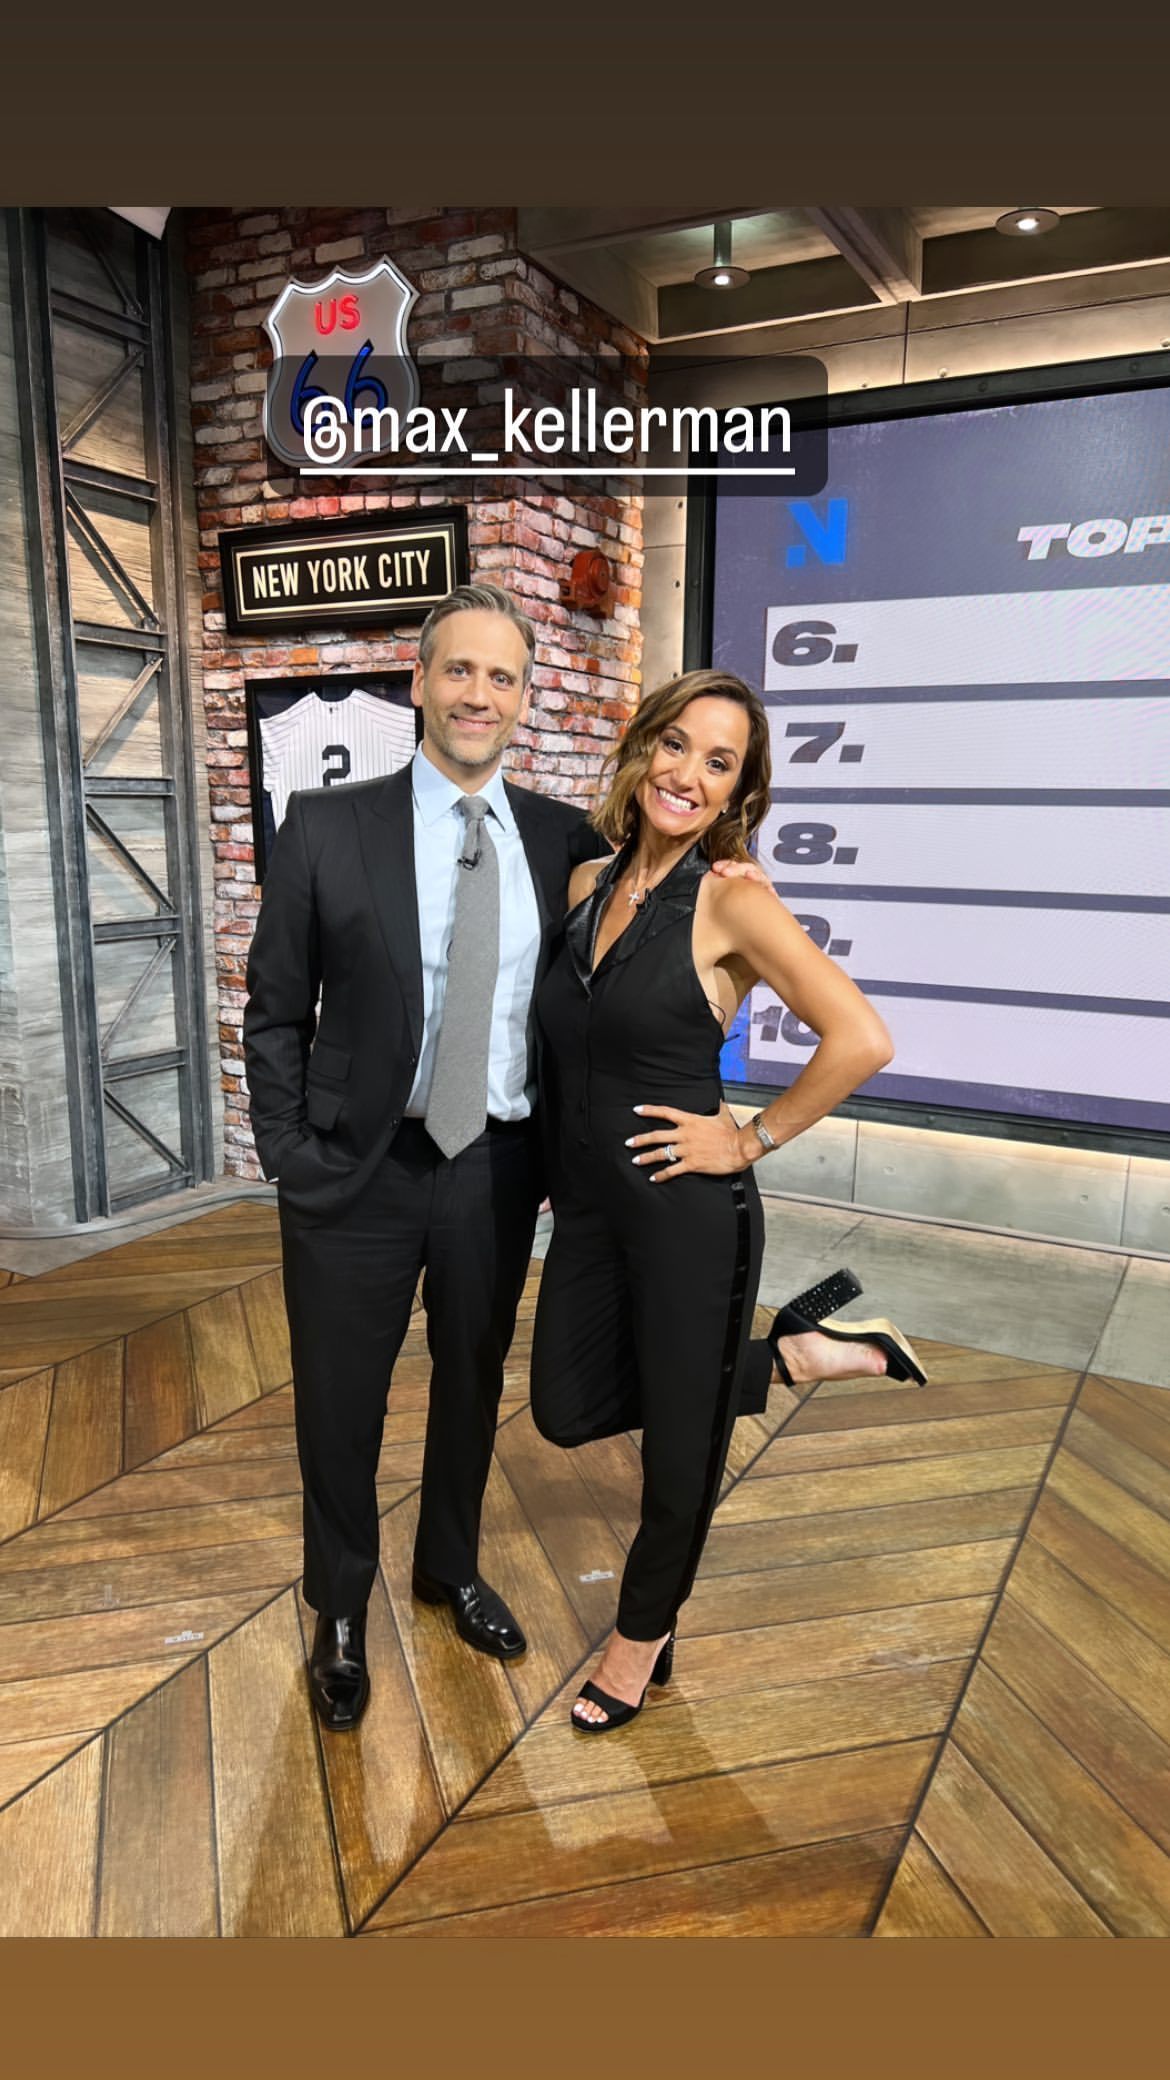 ESPN's Dianna Russini with the kind and sweet gesture